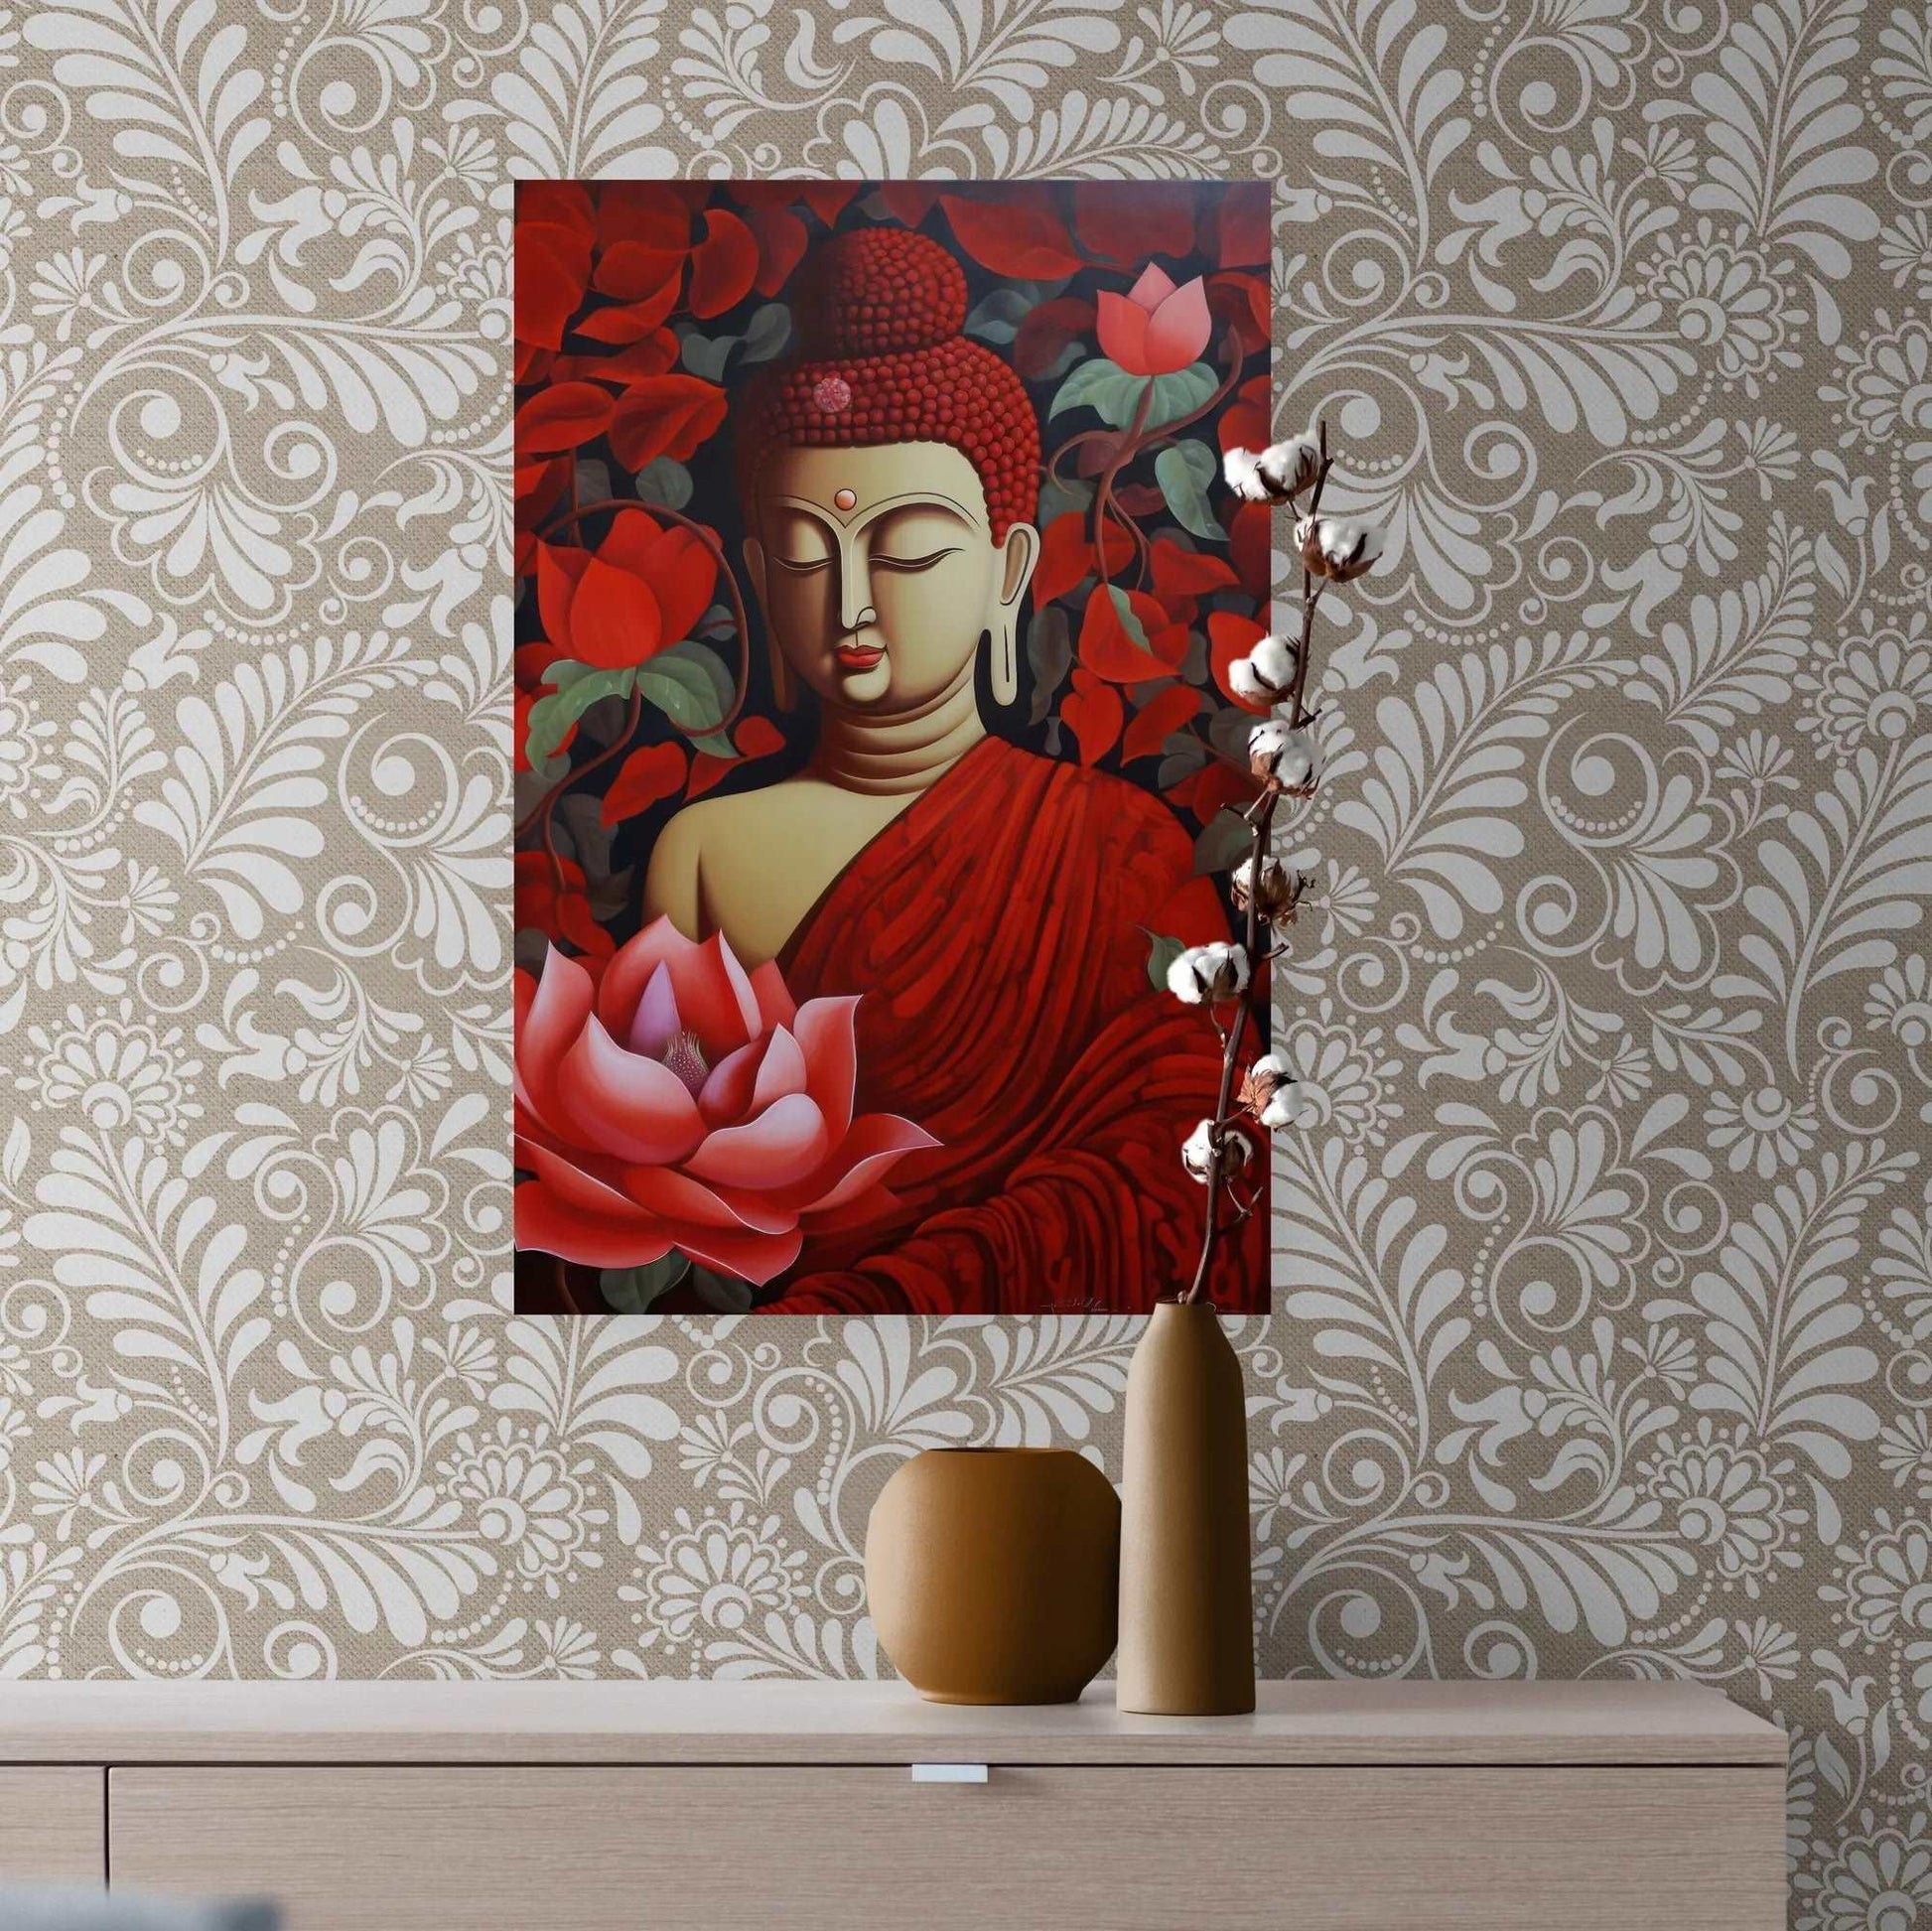 A red and gold Buddha painting against a background of roses, positioned over a wooden console with decorative vases and a cotton branch, enhancing an elegant wallpapered room.